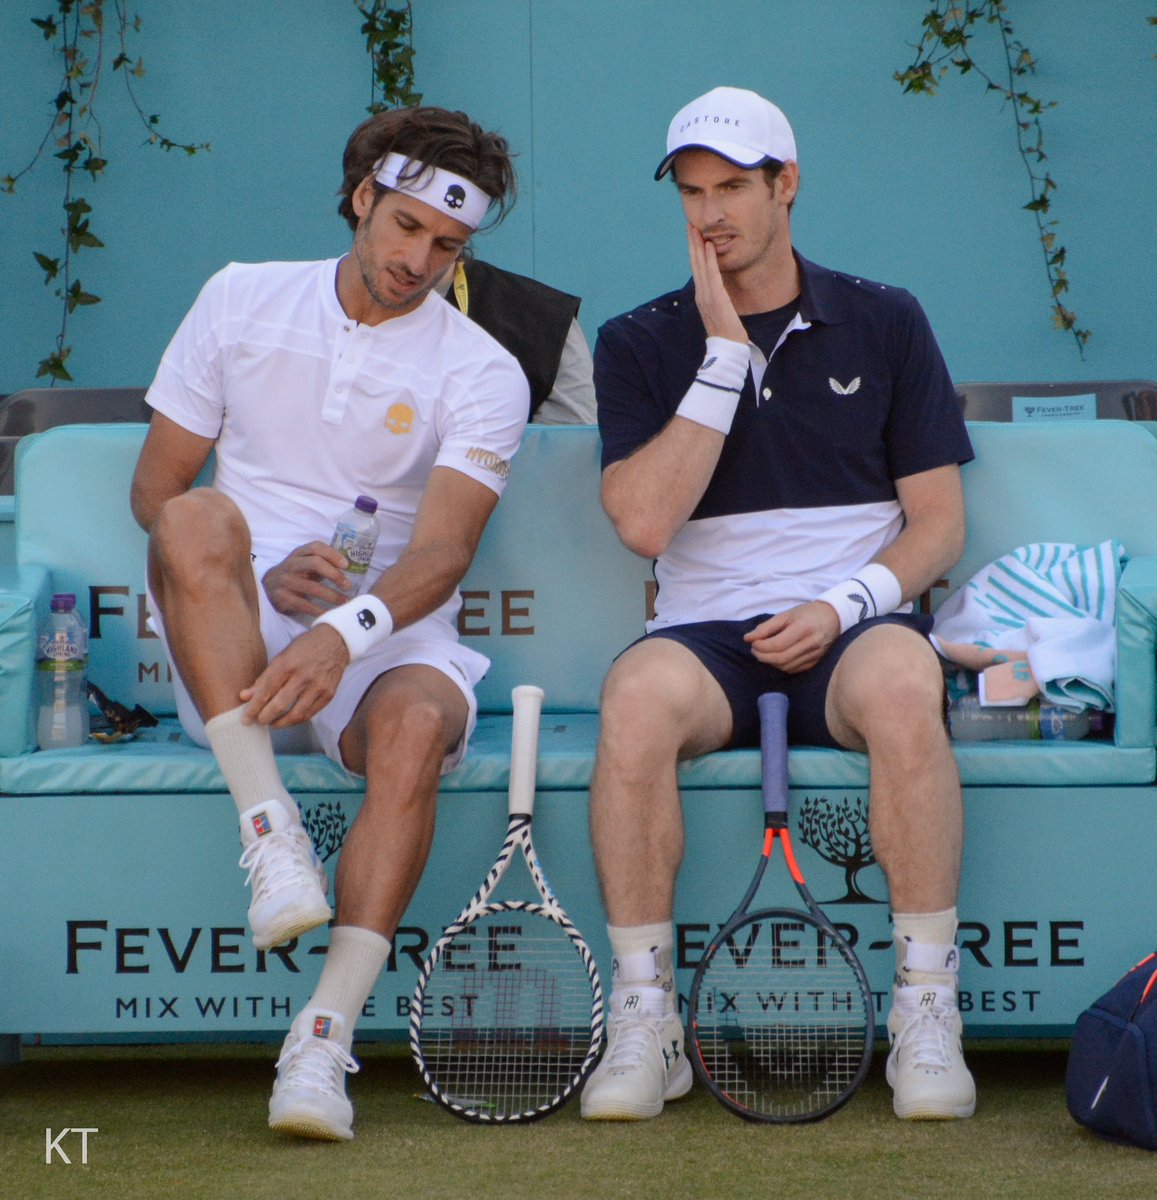 @DailyPicTheme2 Doubles partners Feliciano Lopez and Andy Murray discussing tactics (or socks?) on the bench. 
#DailyPictureTheme 
#Bench 
#AndyMurray #FelicianoLopez 
#Tennis 
#Winners